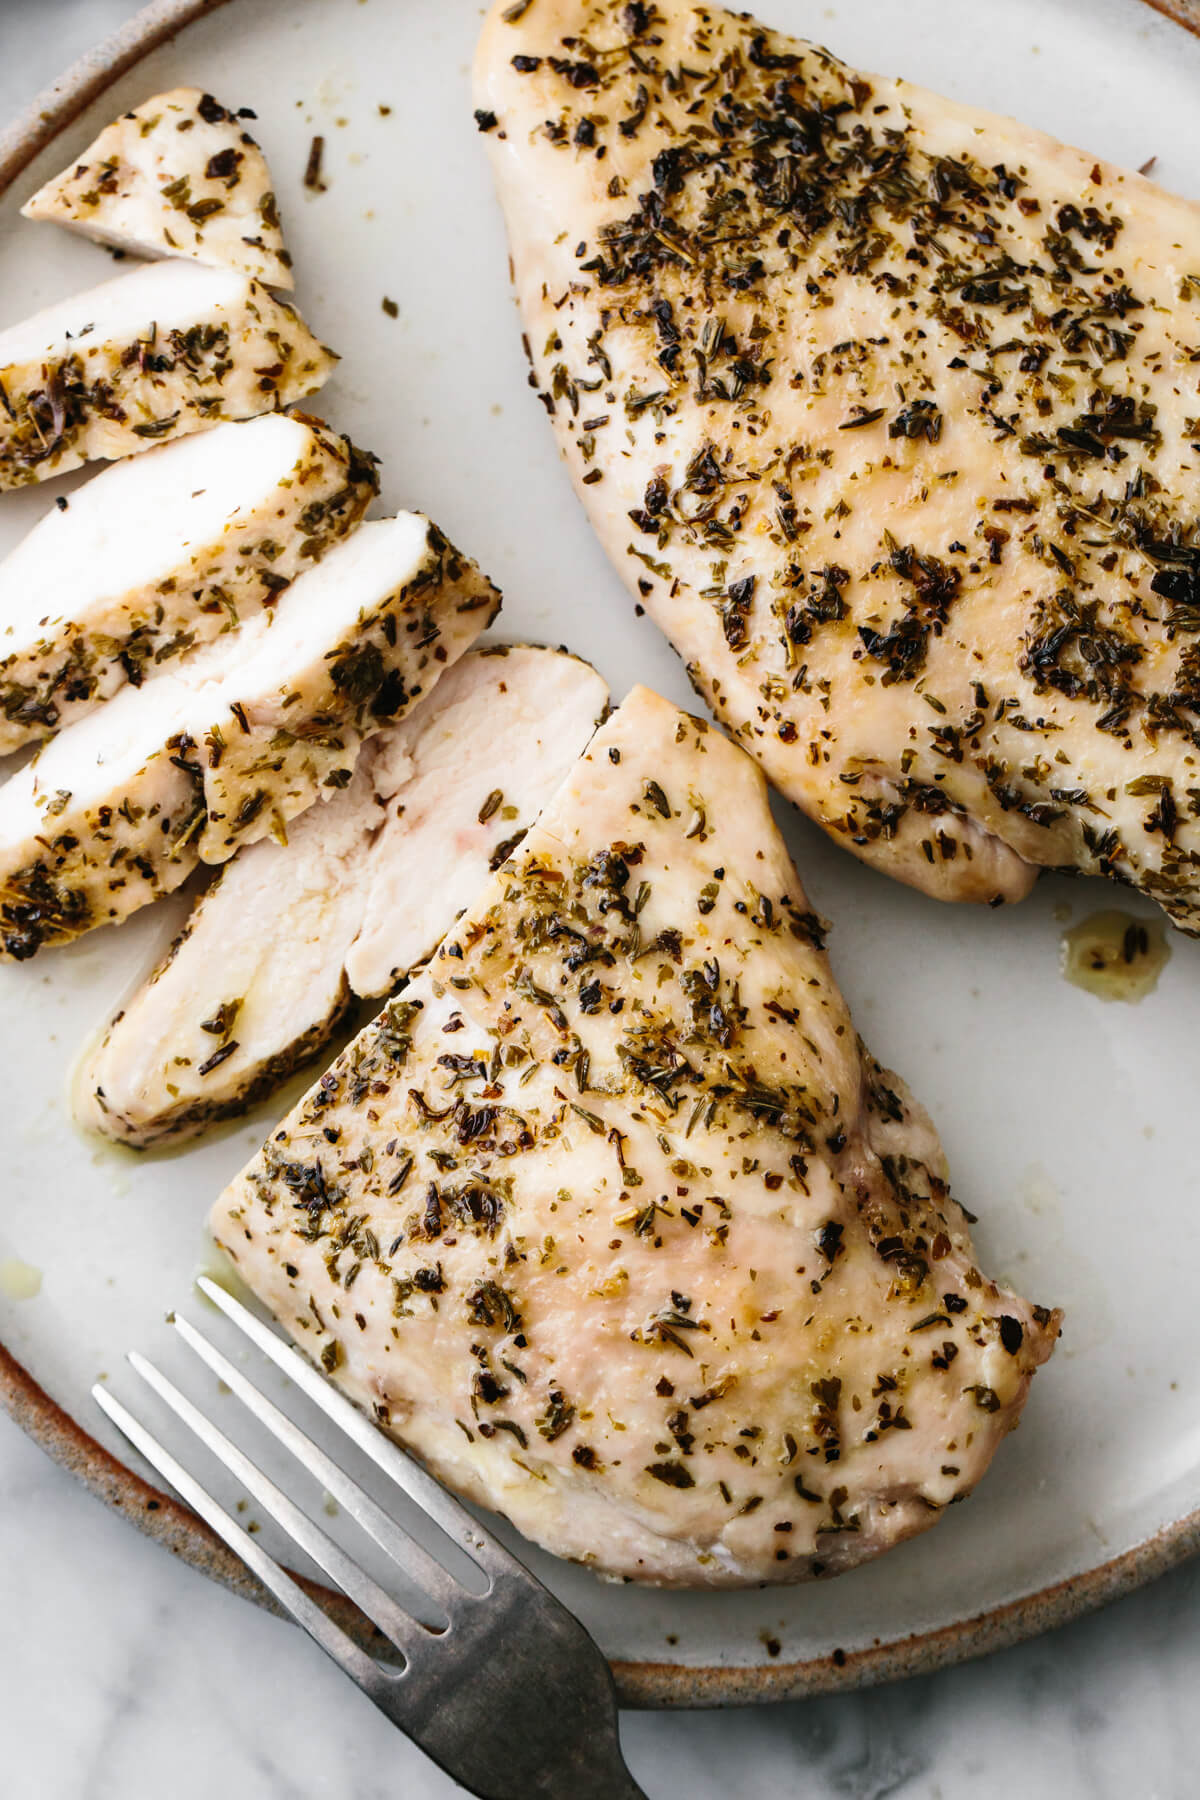 Herb baked chicken breast sliced into pieces on a plate.